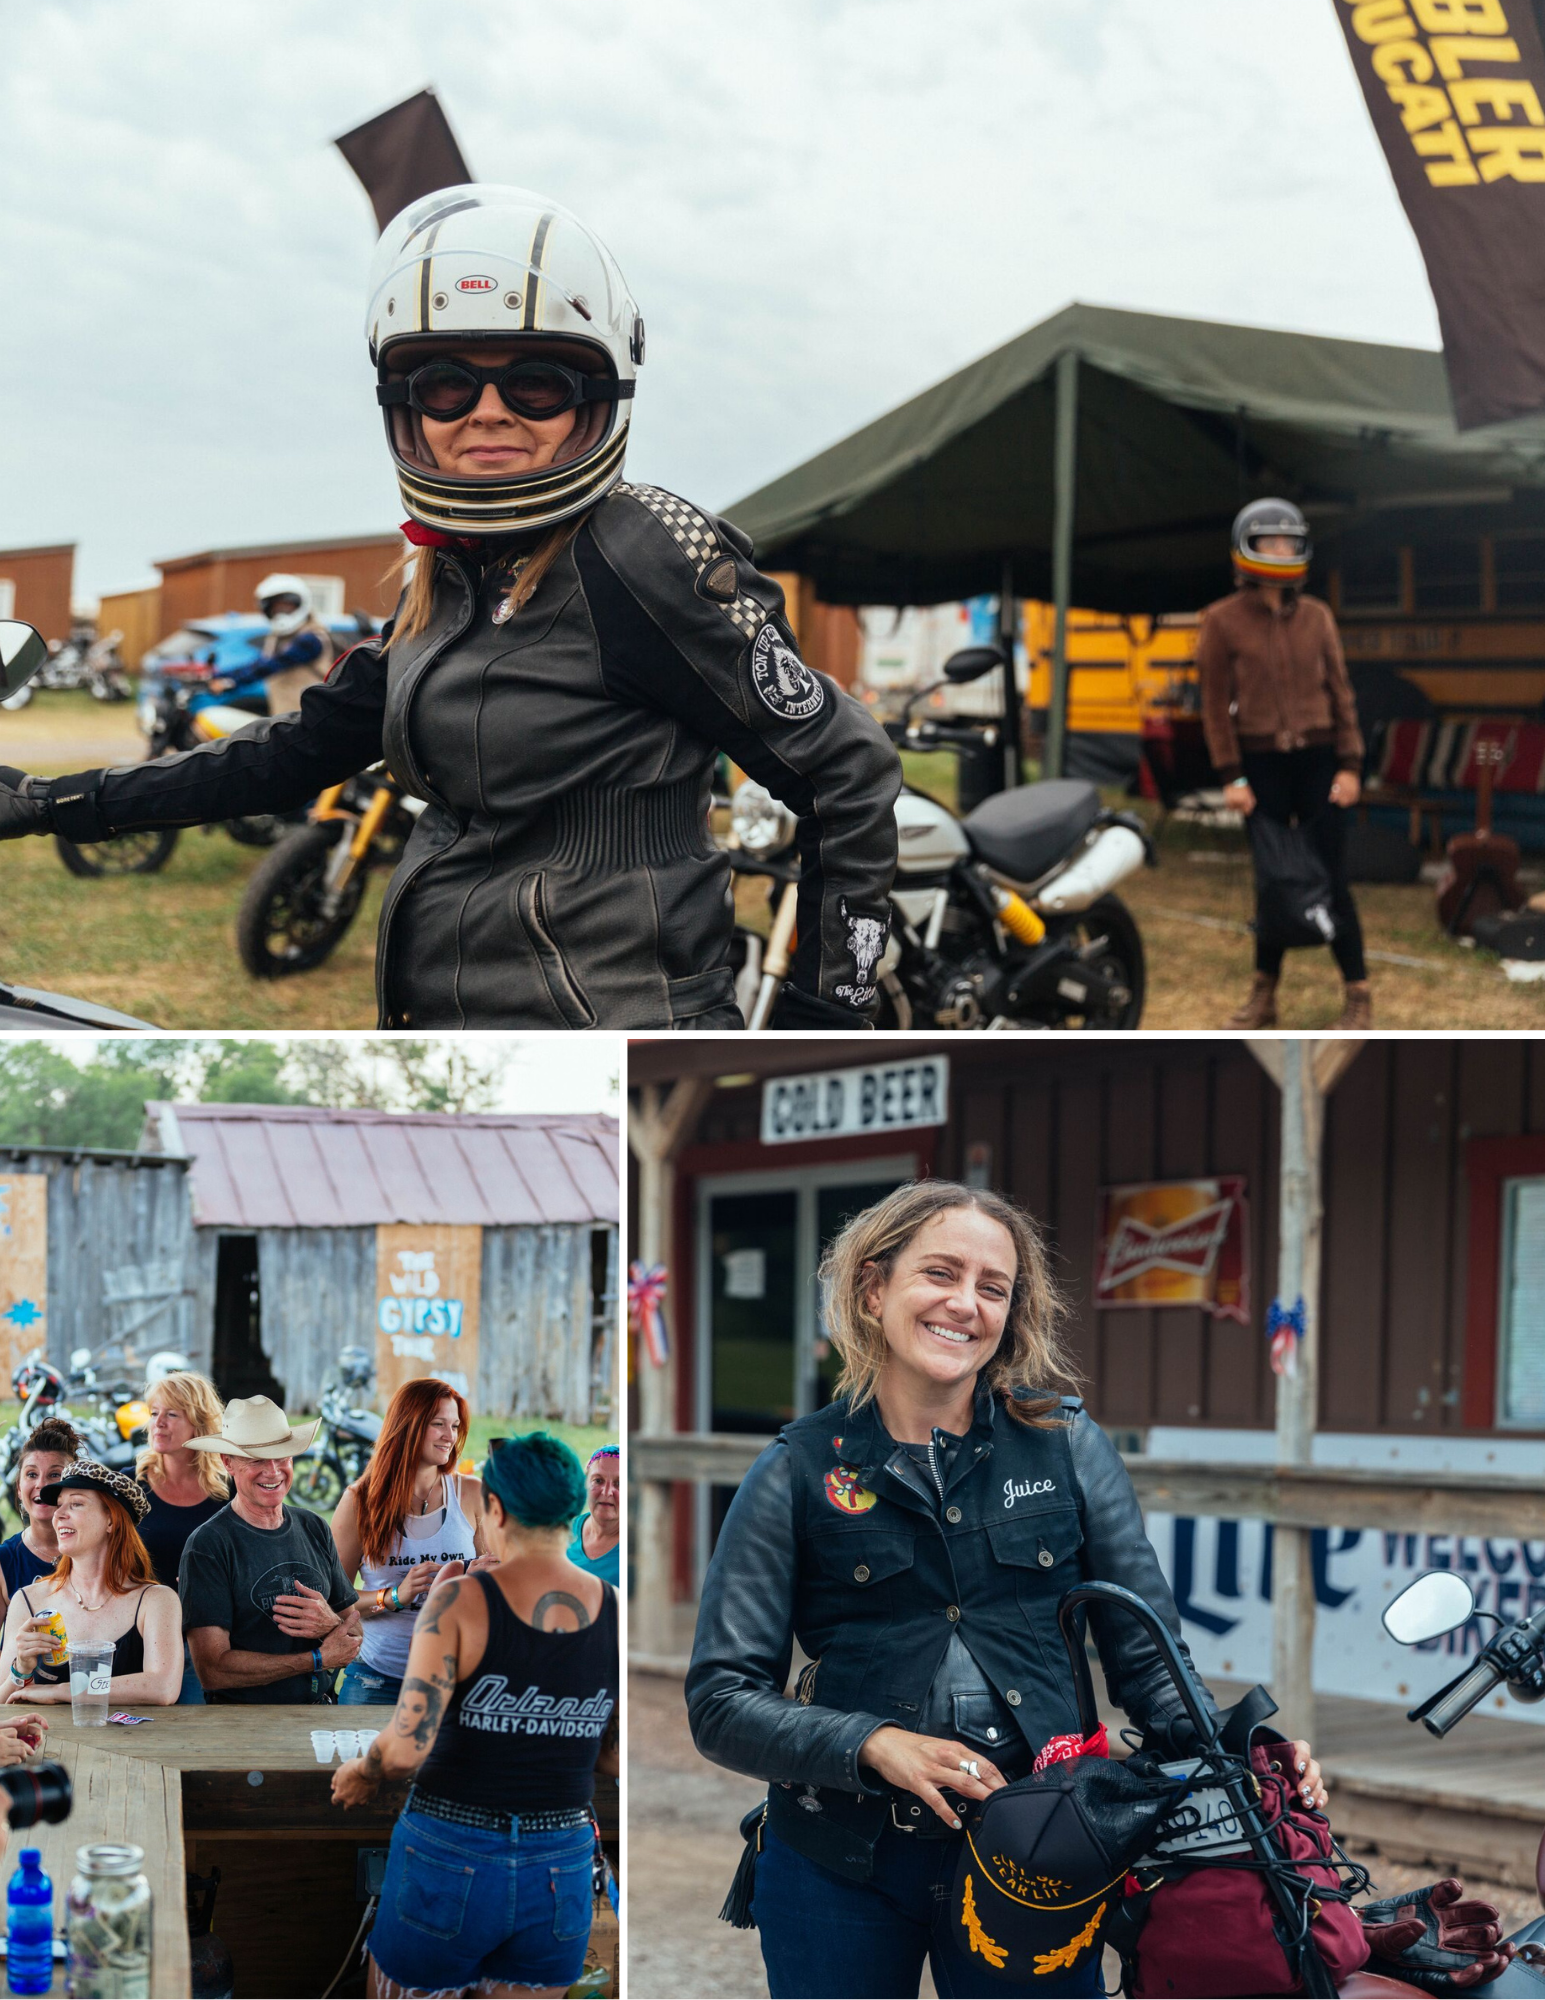 Female motorcyclists getting ready to ride